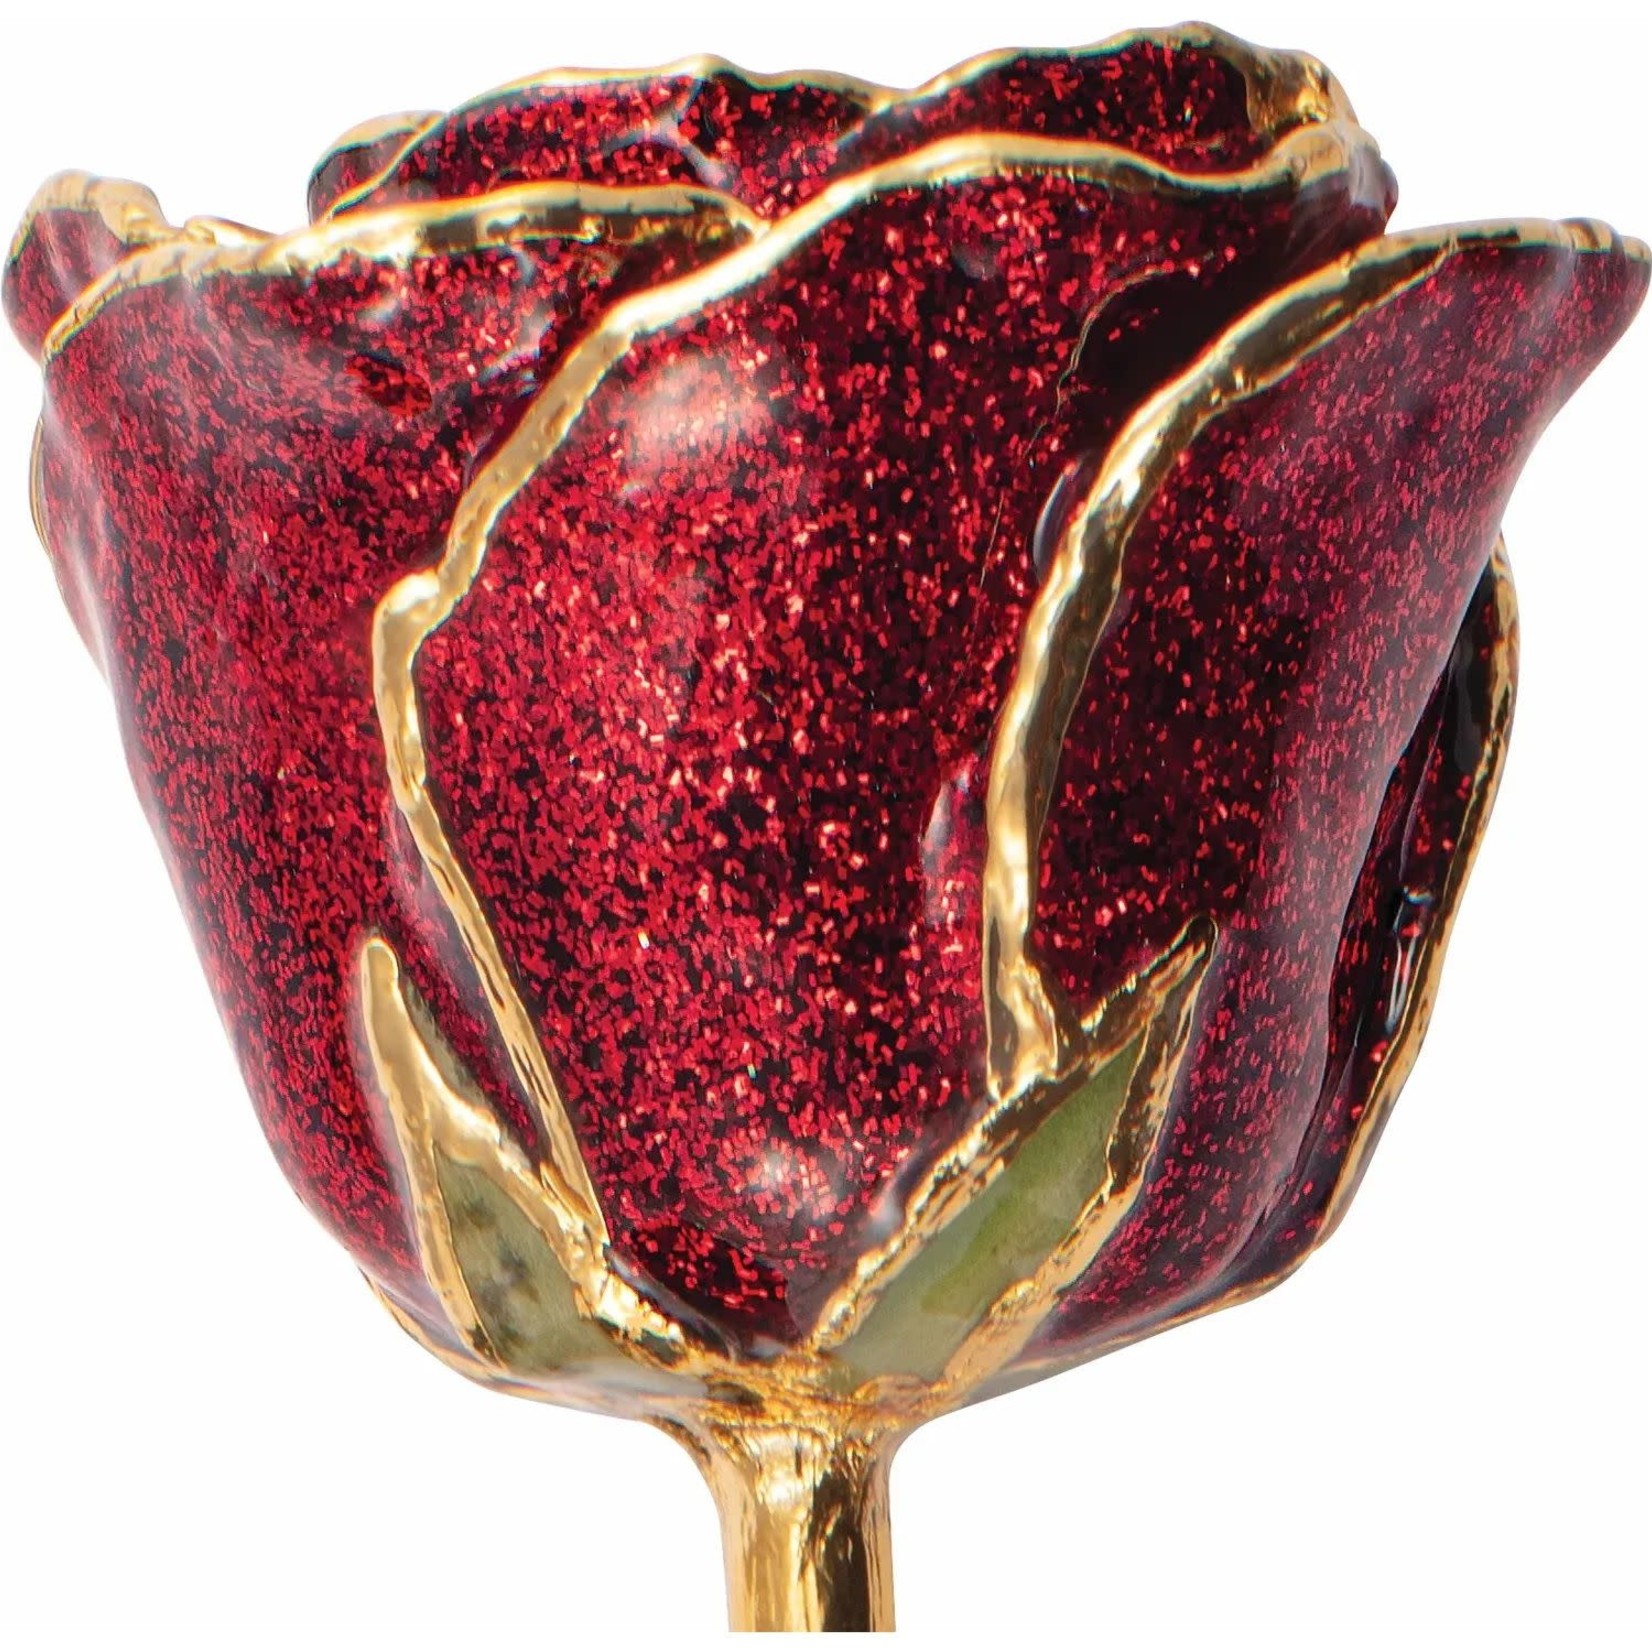 STULLER INC. Lacquer Dipped 24K Gold Trimmed Sparkle Ruby Rose